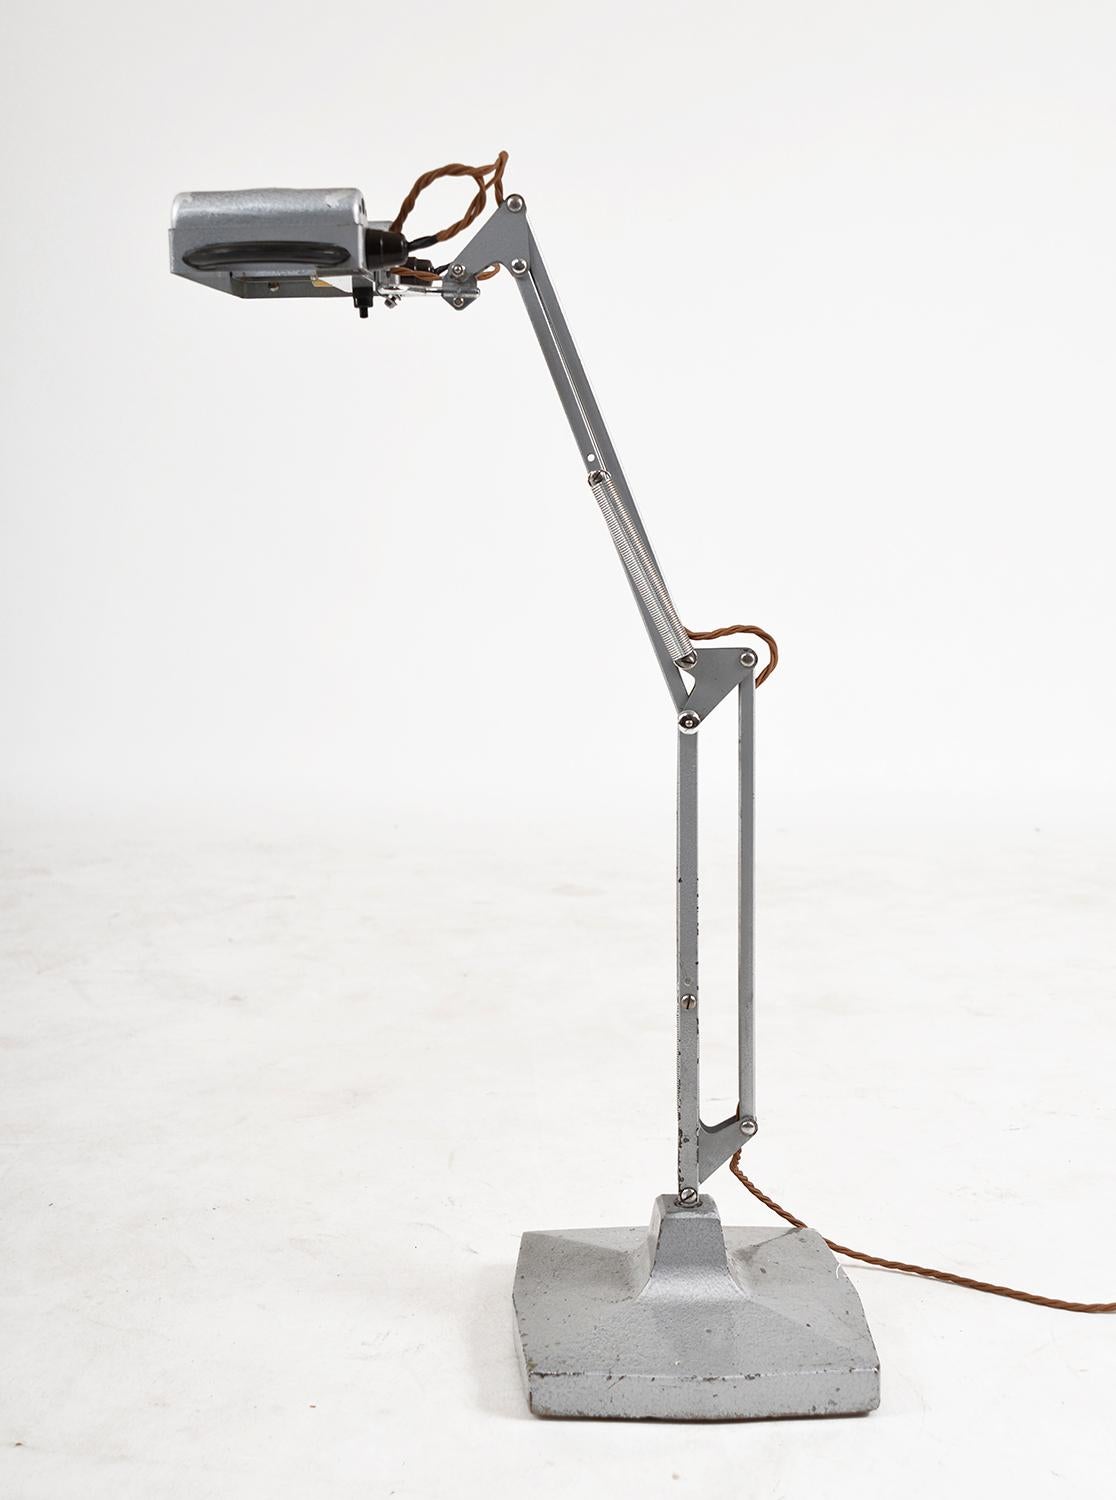 Hammered 1940s Anglepoise Steel Industrial Lamp 1431 by Herbert Terry & Sons Ltd, England